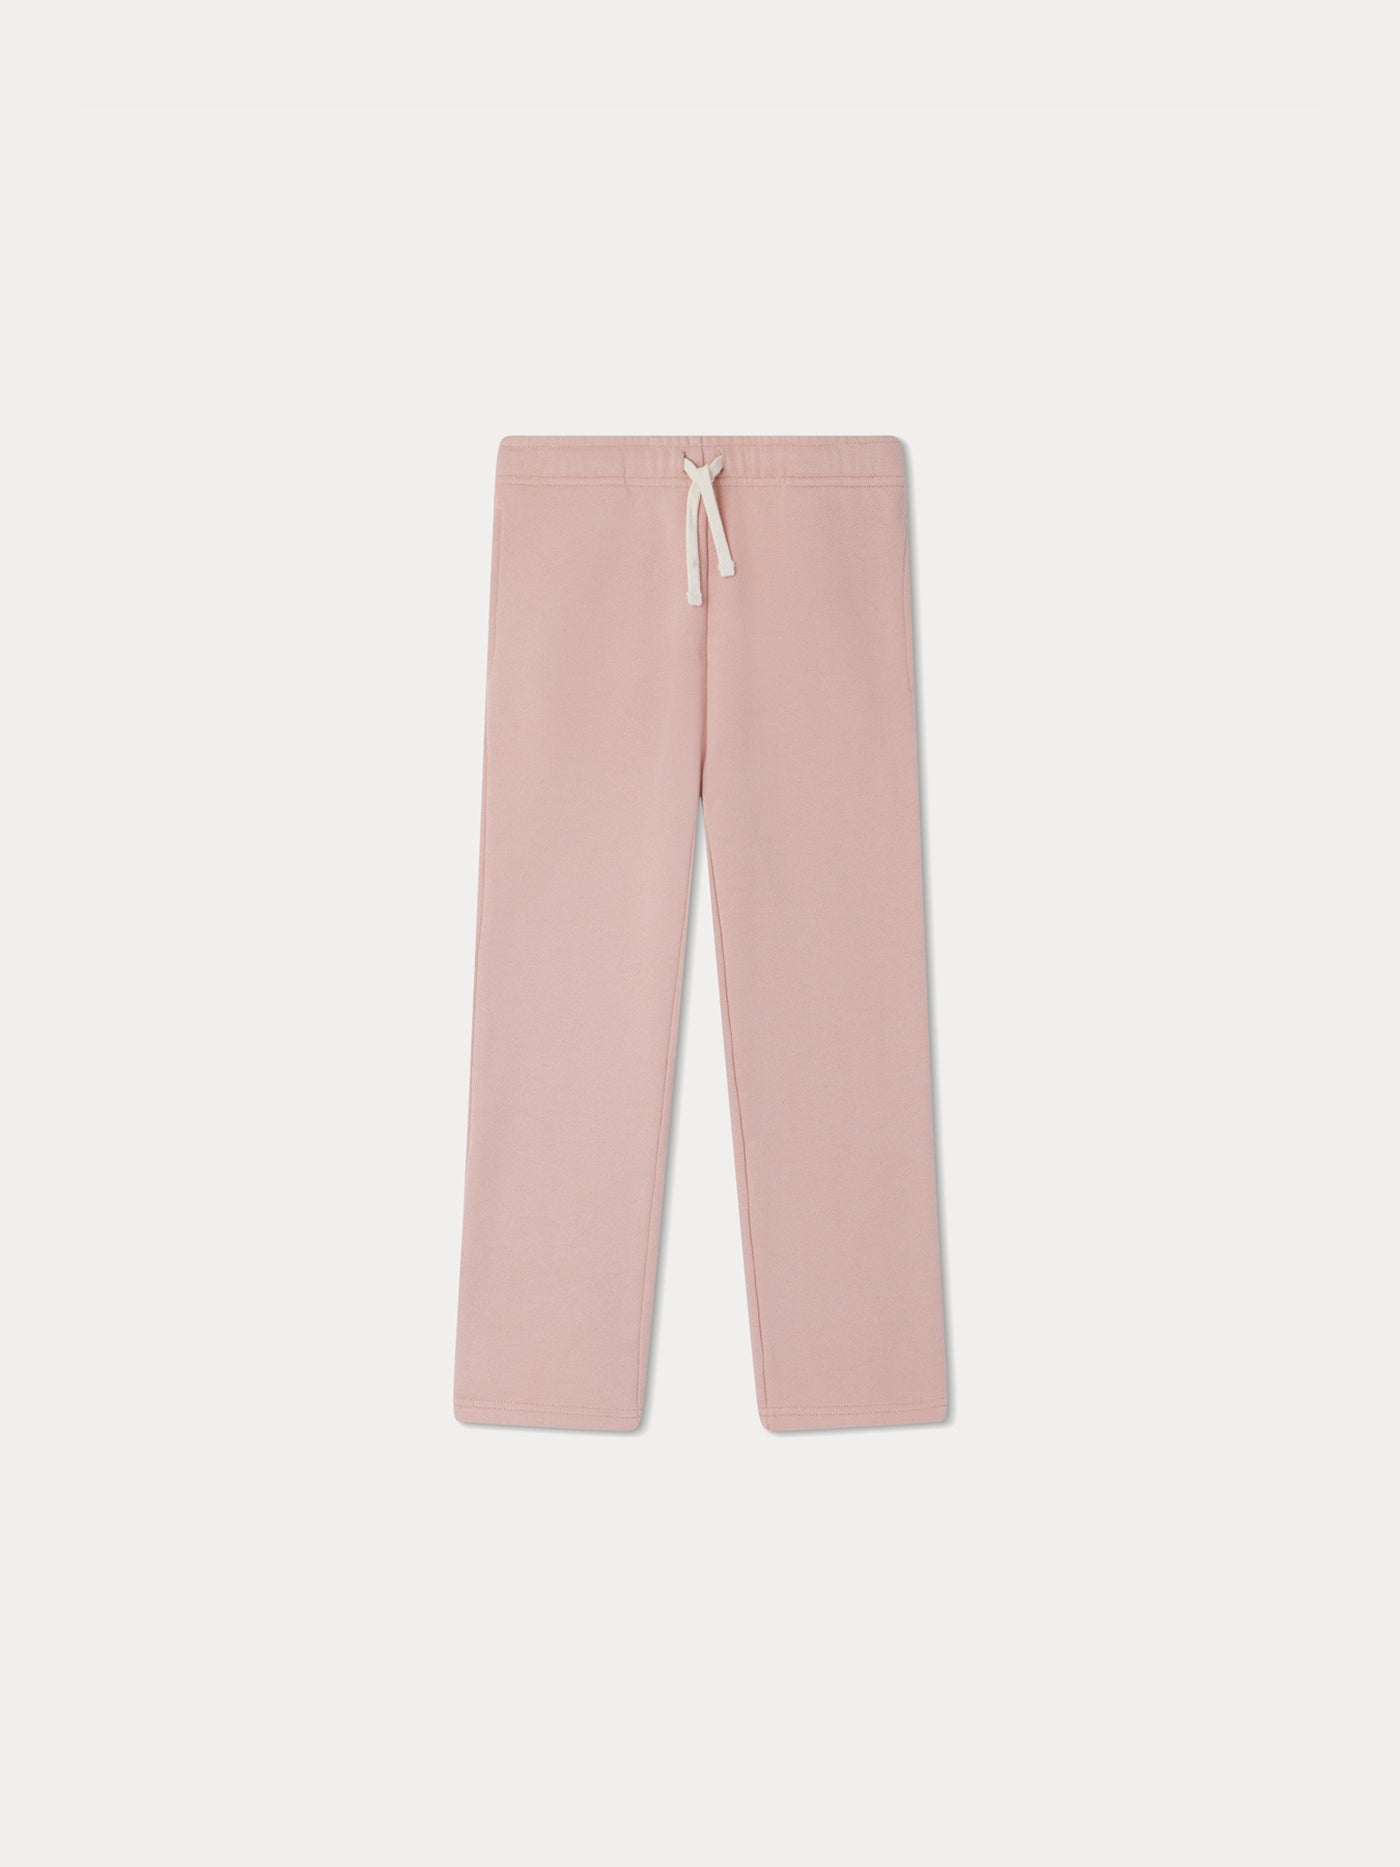 Solid-Colored Dalila Sweatpants faded pink